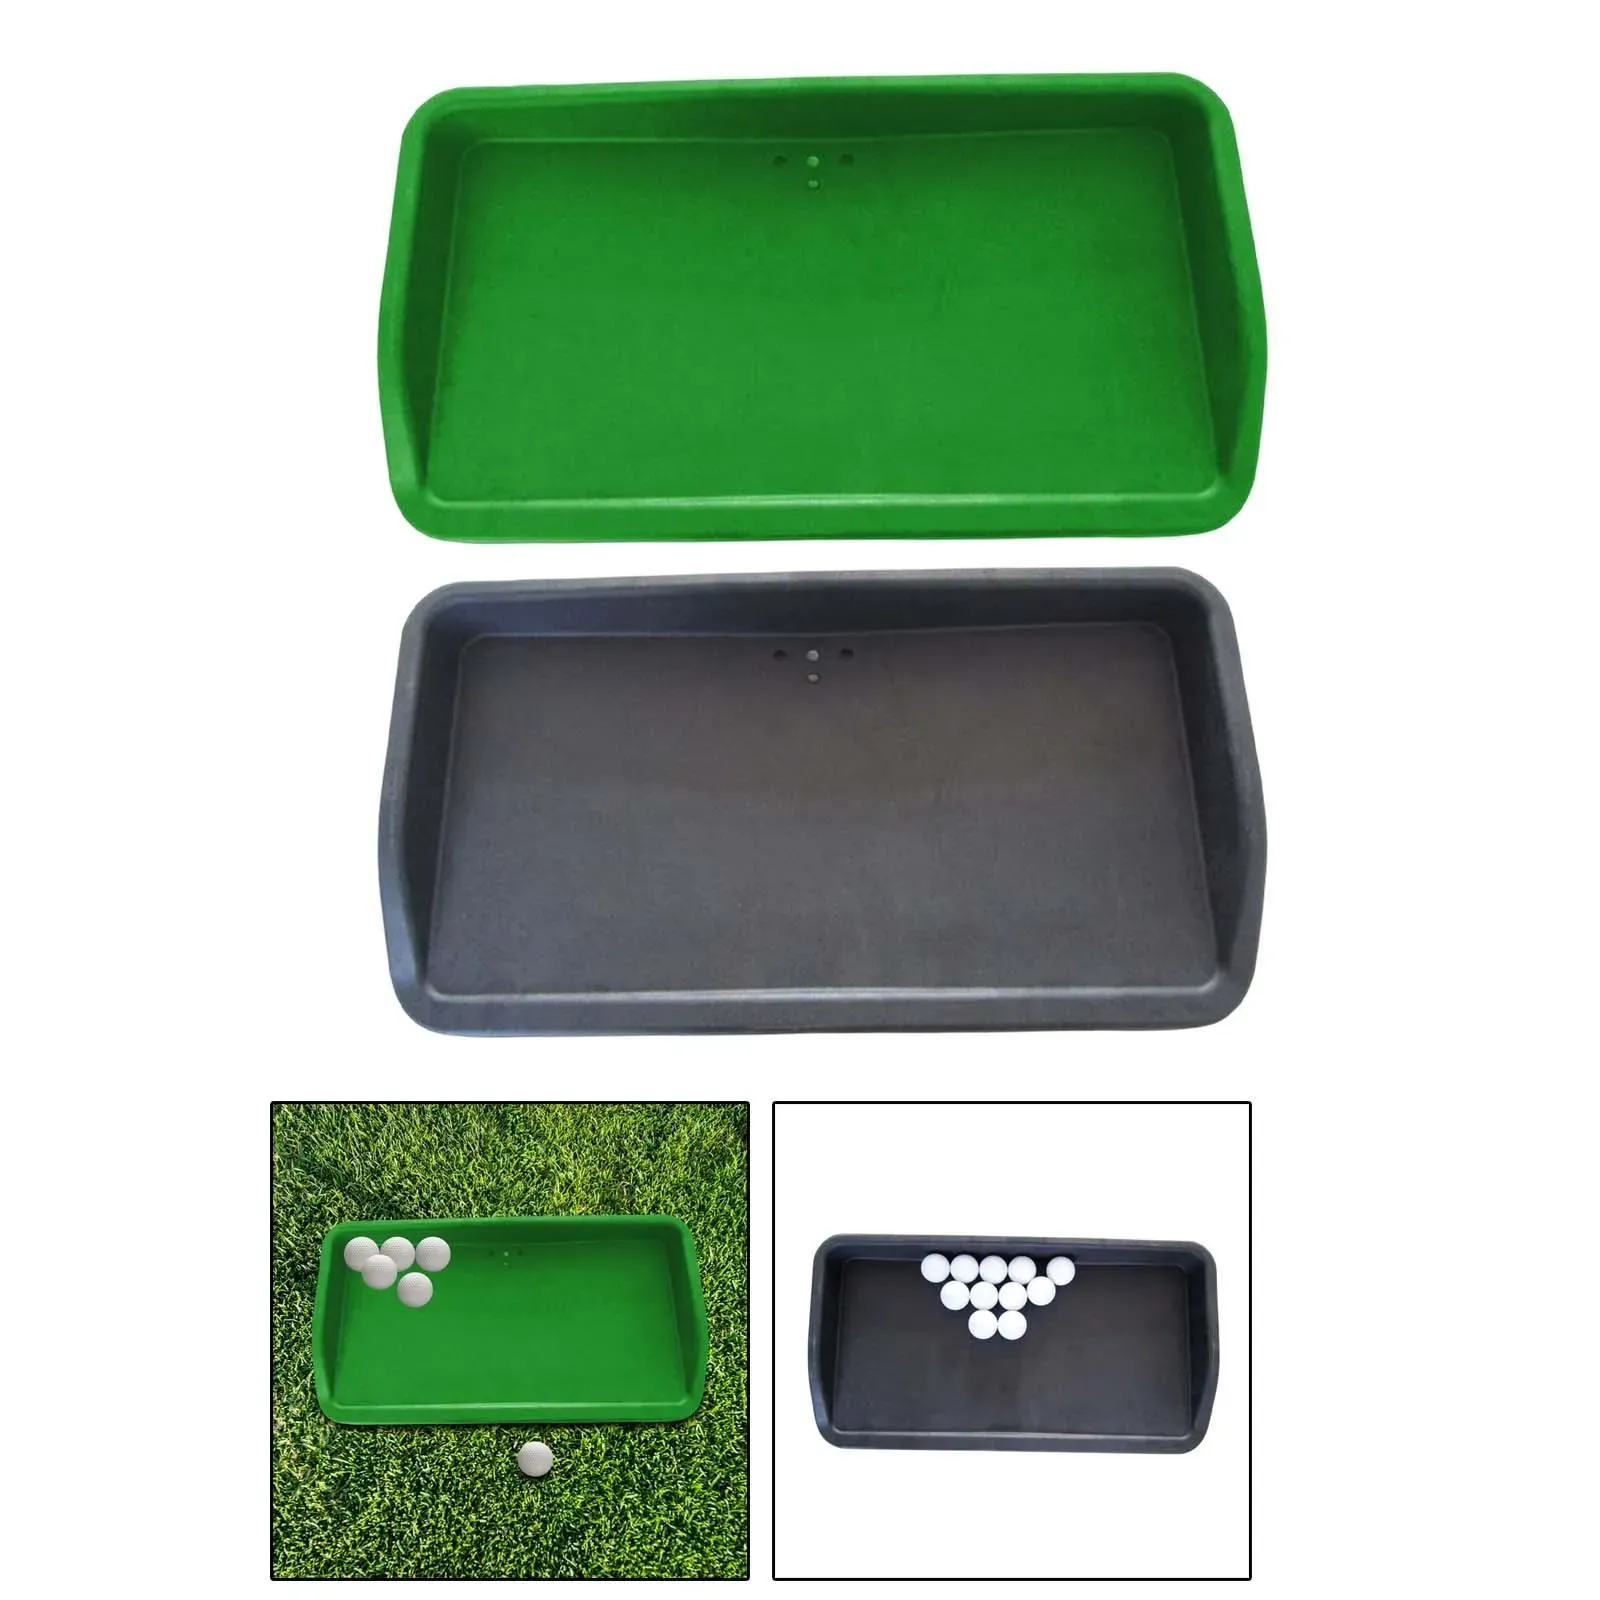 Rubber Golf Ball Tray Practice Aids Golfer Accessory Container Supplies Home